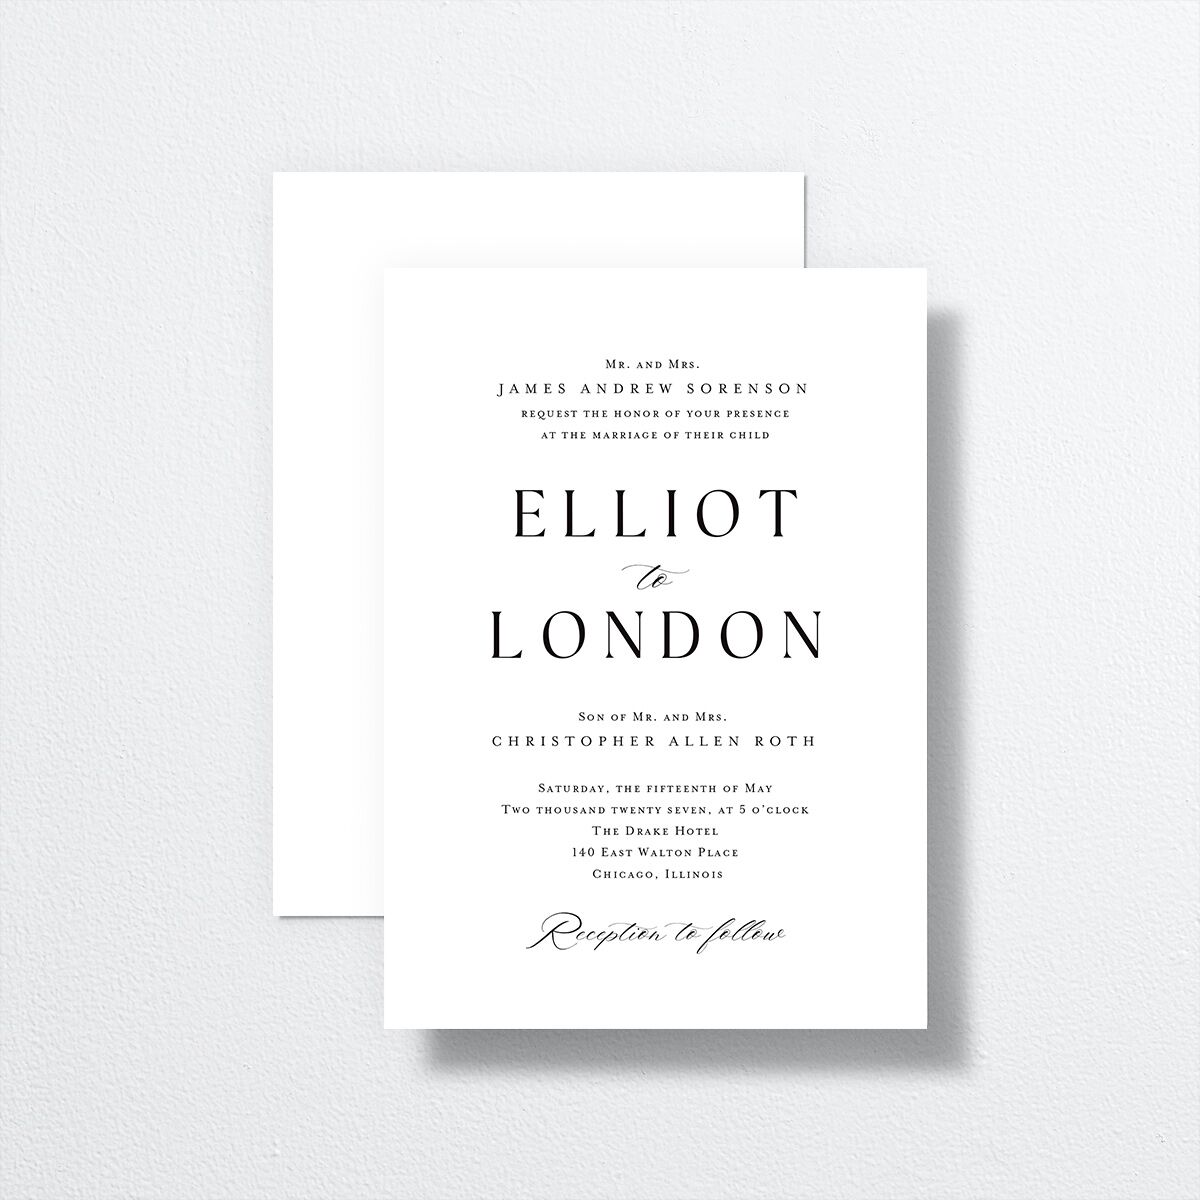 Timeless Typography Wedding Invitations front-and-back in white